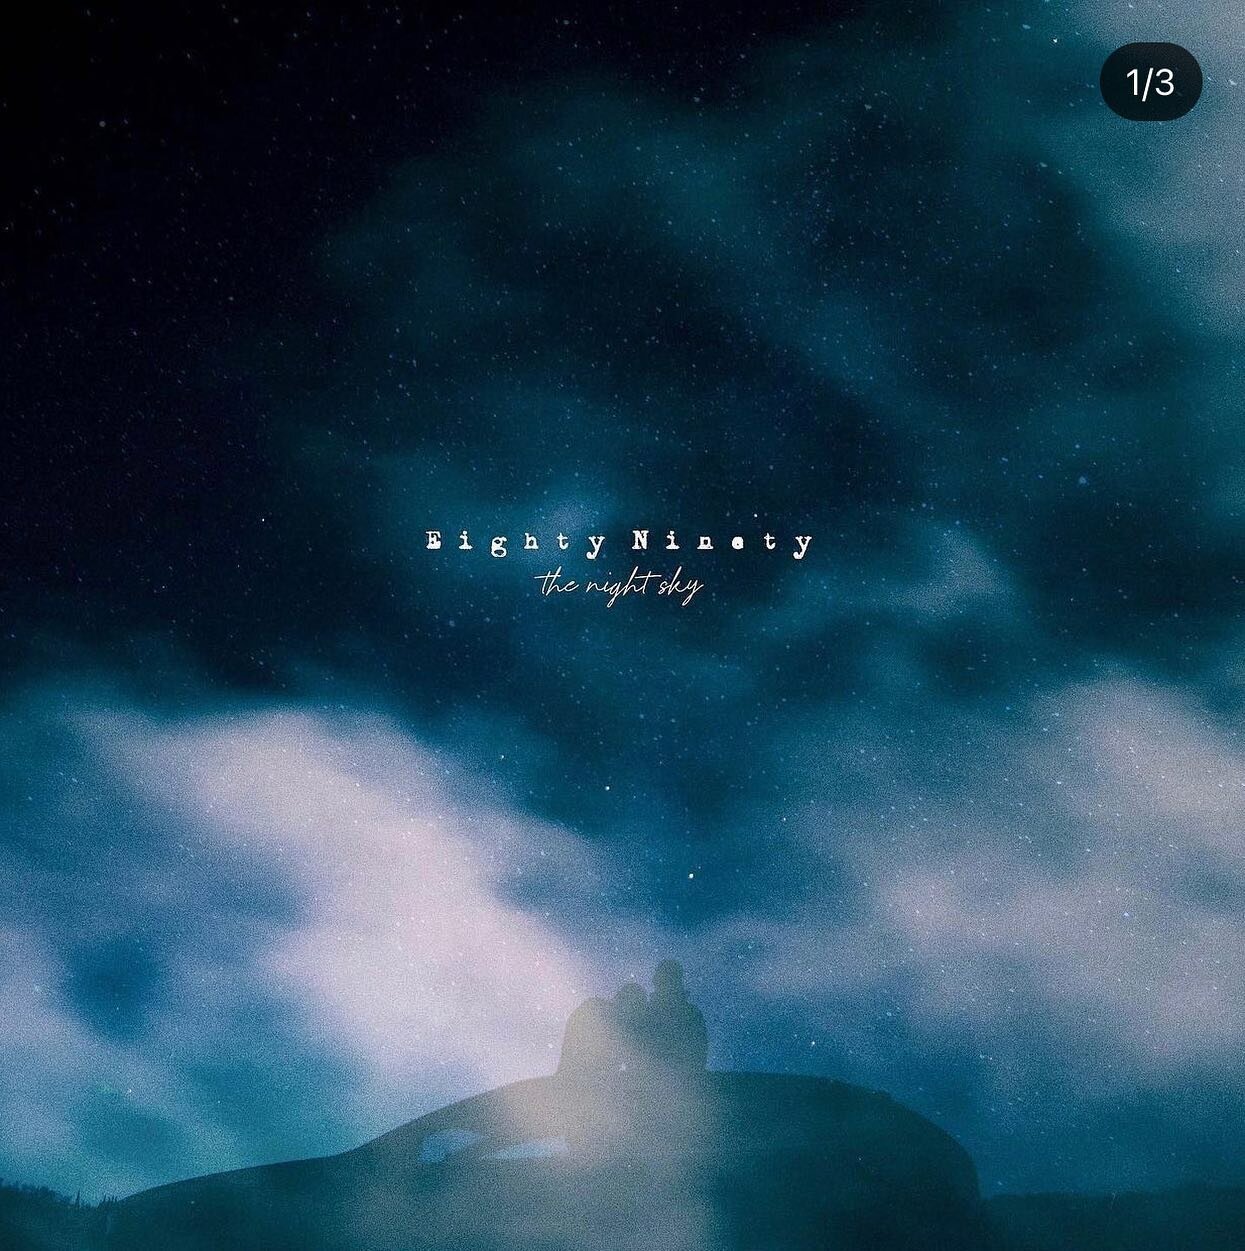 Abner and I have been working on this record forever. It&rsquo;s called &ldquo;The Night Sky.&rdquo; I would be failing myself if I didn&rsquo;t celebrate the time spent with the people I love making stuff I care about ; and one of the great achievem